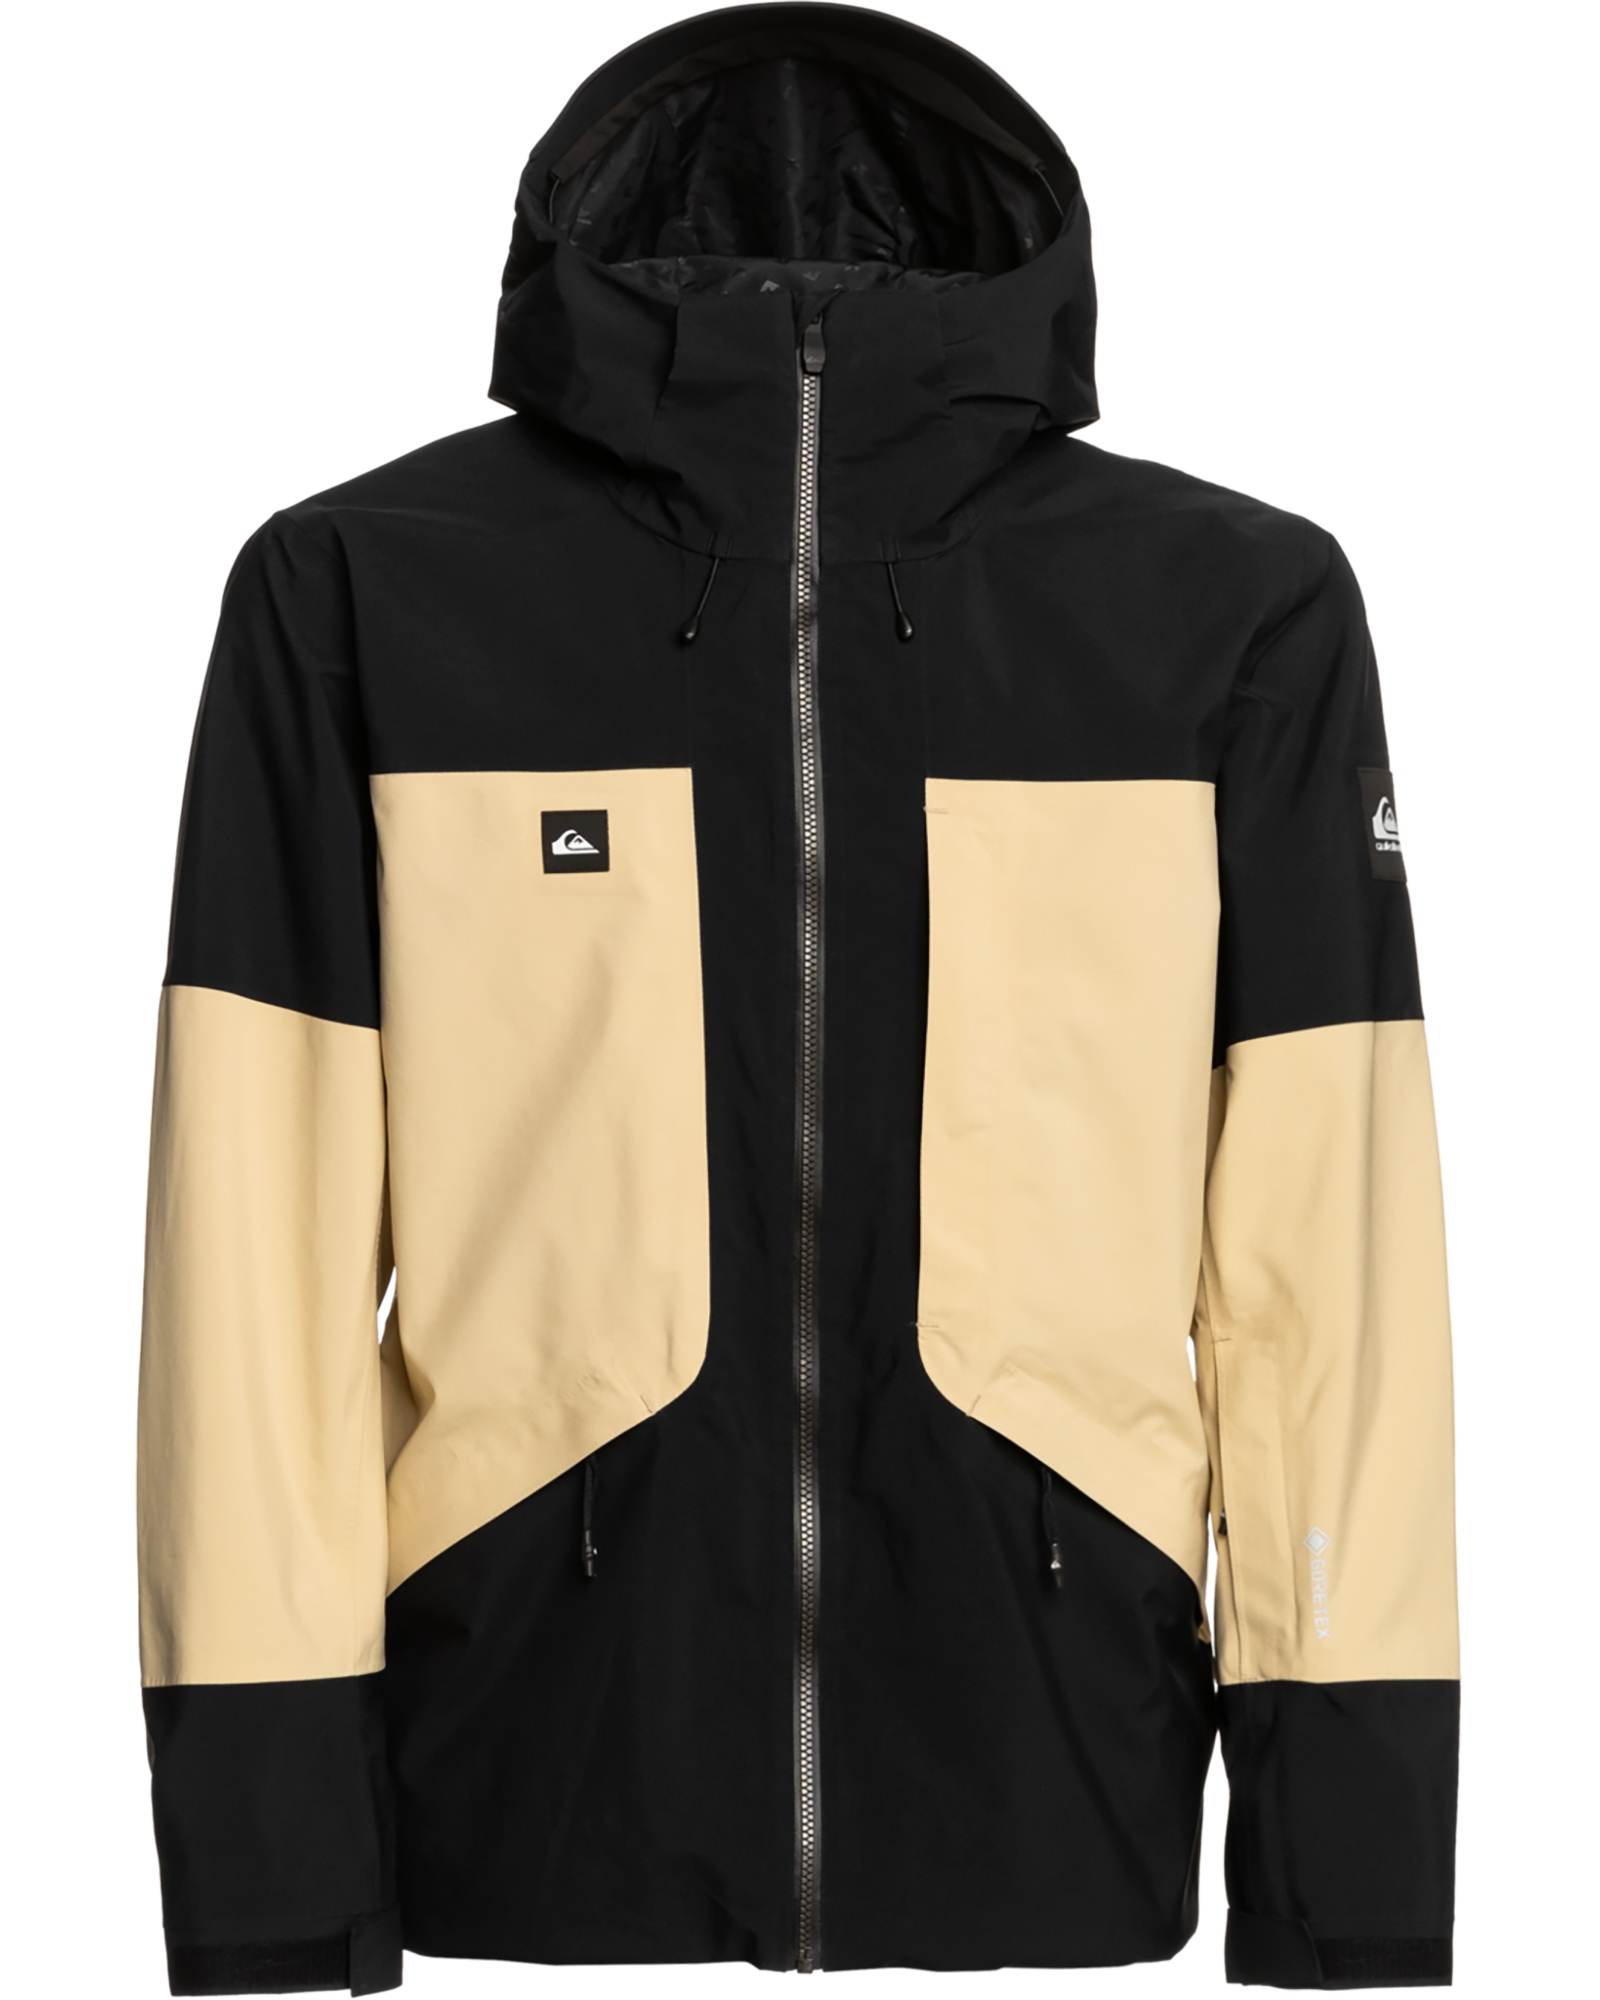 Quiksilver Forever Stretch GORE TEX Insulated Men’s Jacket - Black/Pale Khaki M